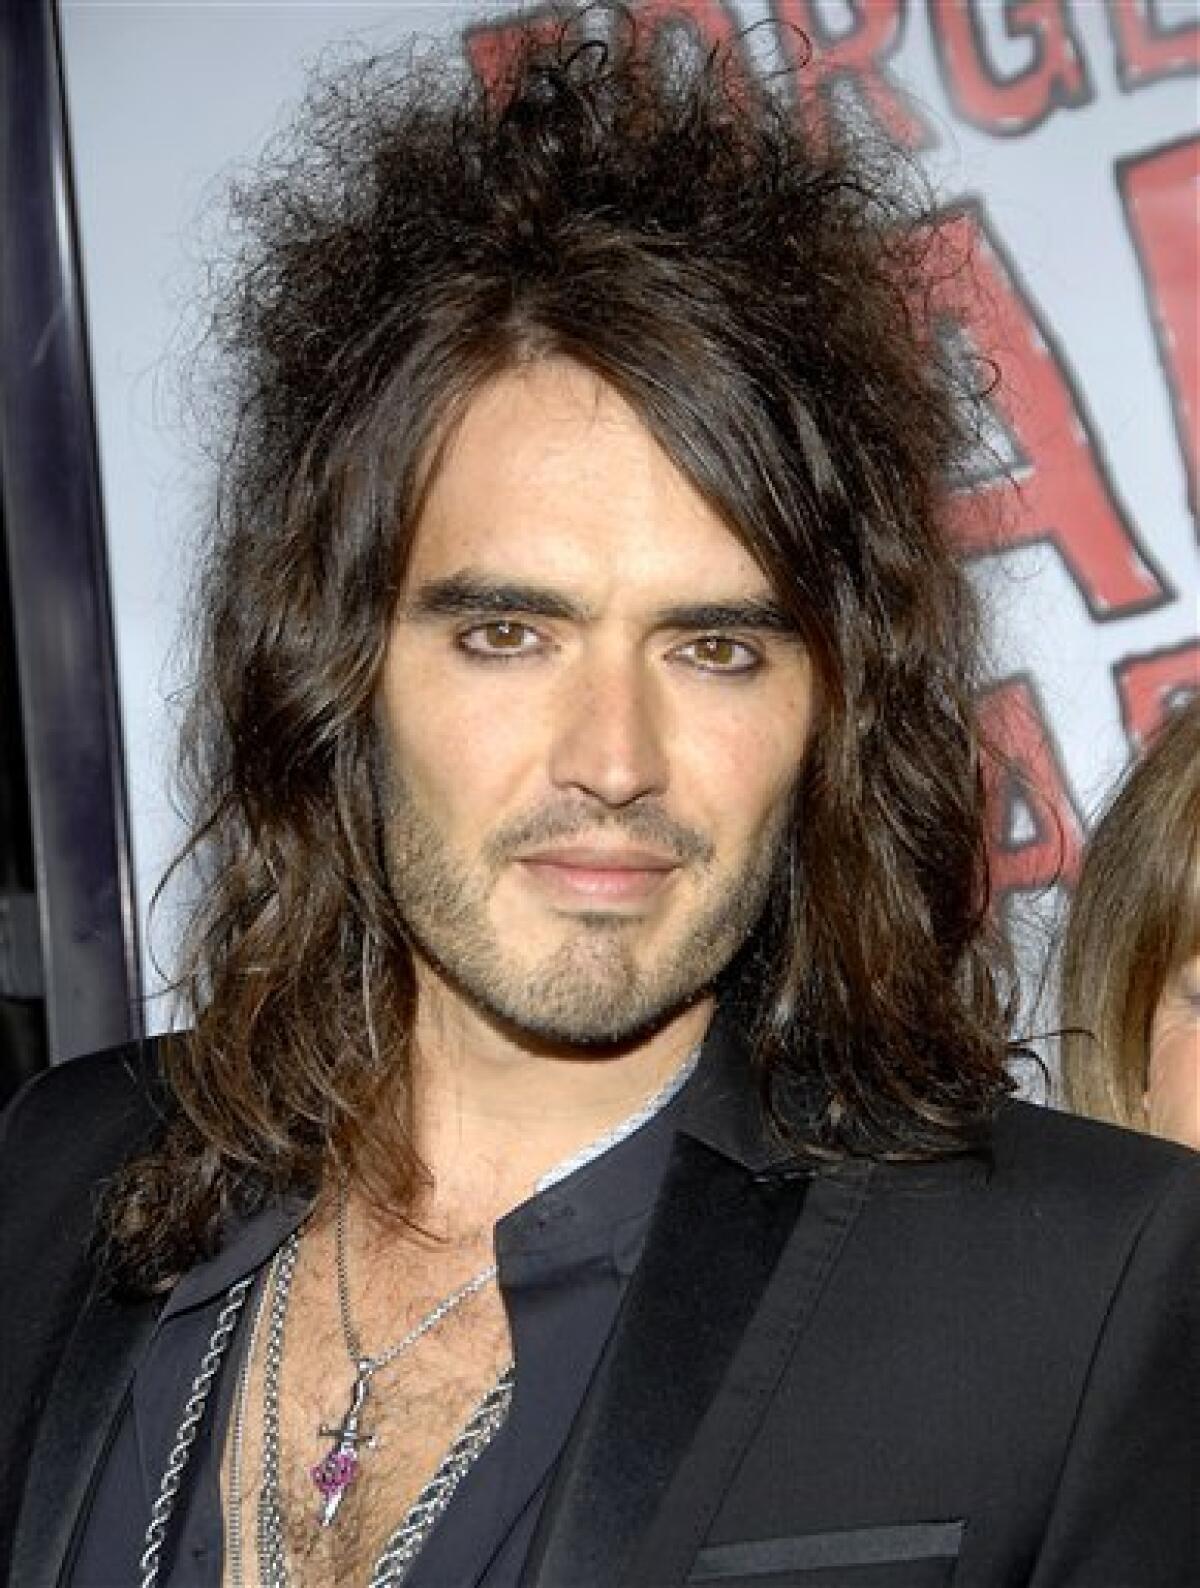 In this April 10, 2008 file photo, Russell Brand poses on the press line at the premiere of "Forgetting Sarah Marshall" in Los Angeles. Brand and Jonathan Ross, popular BBC broadcasters, were indefinitely suspended, Wednesday, Oct. 29, 2008, for leaving a series of lewd phone messages on an actor's answering machine. (AP Photo/Dan Steinberg, file)